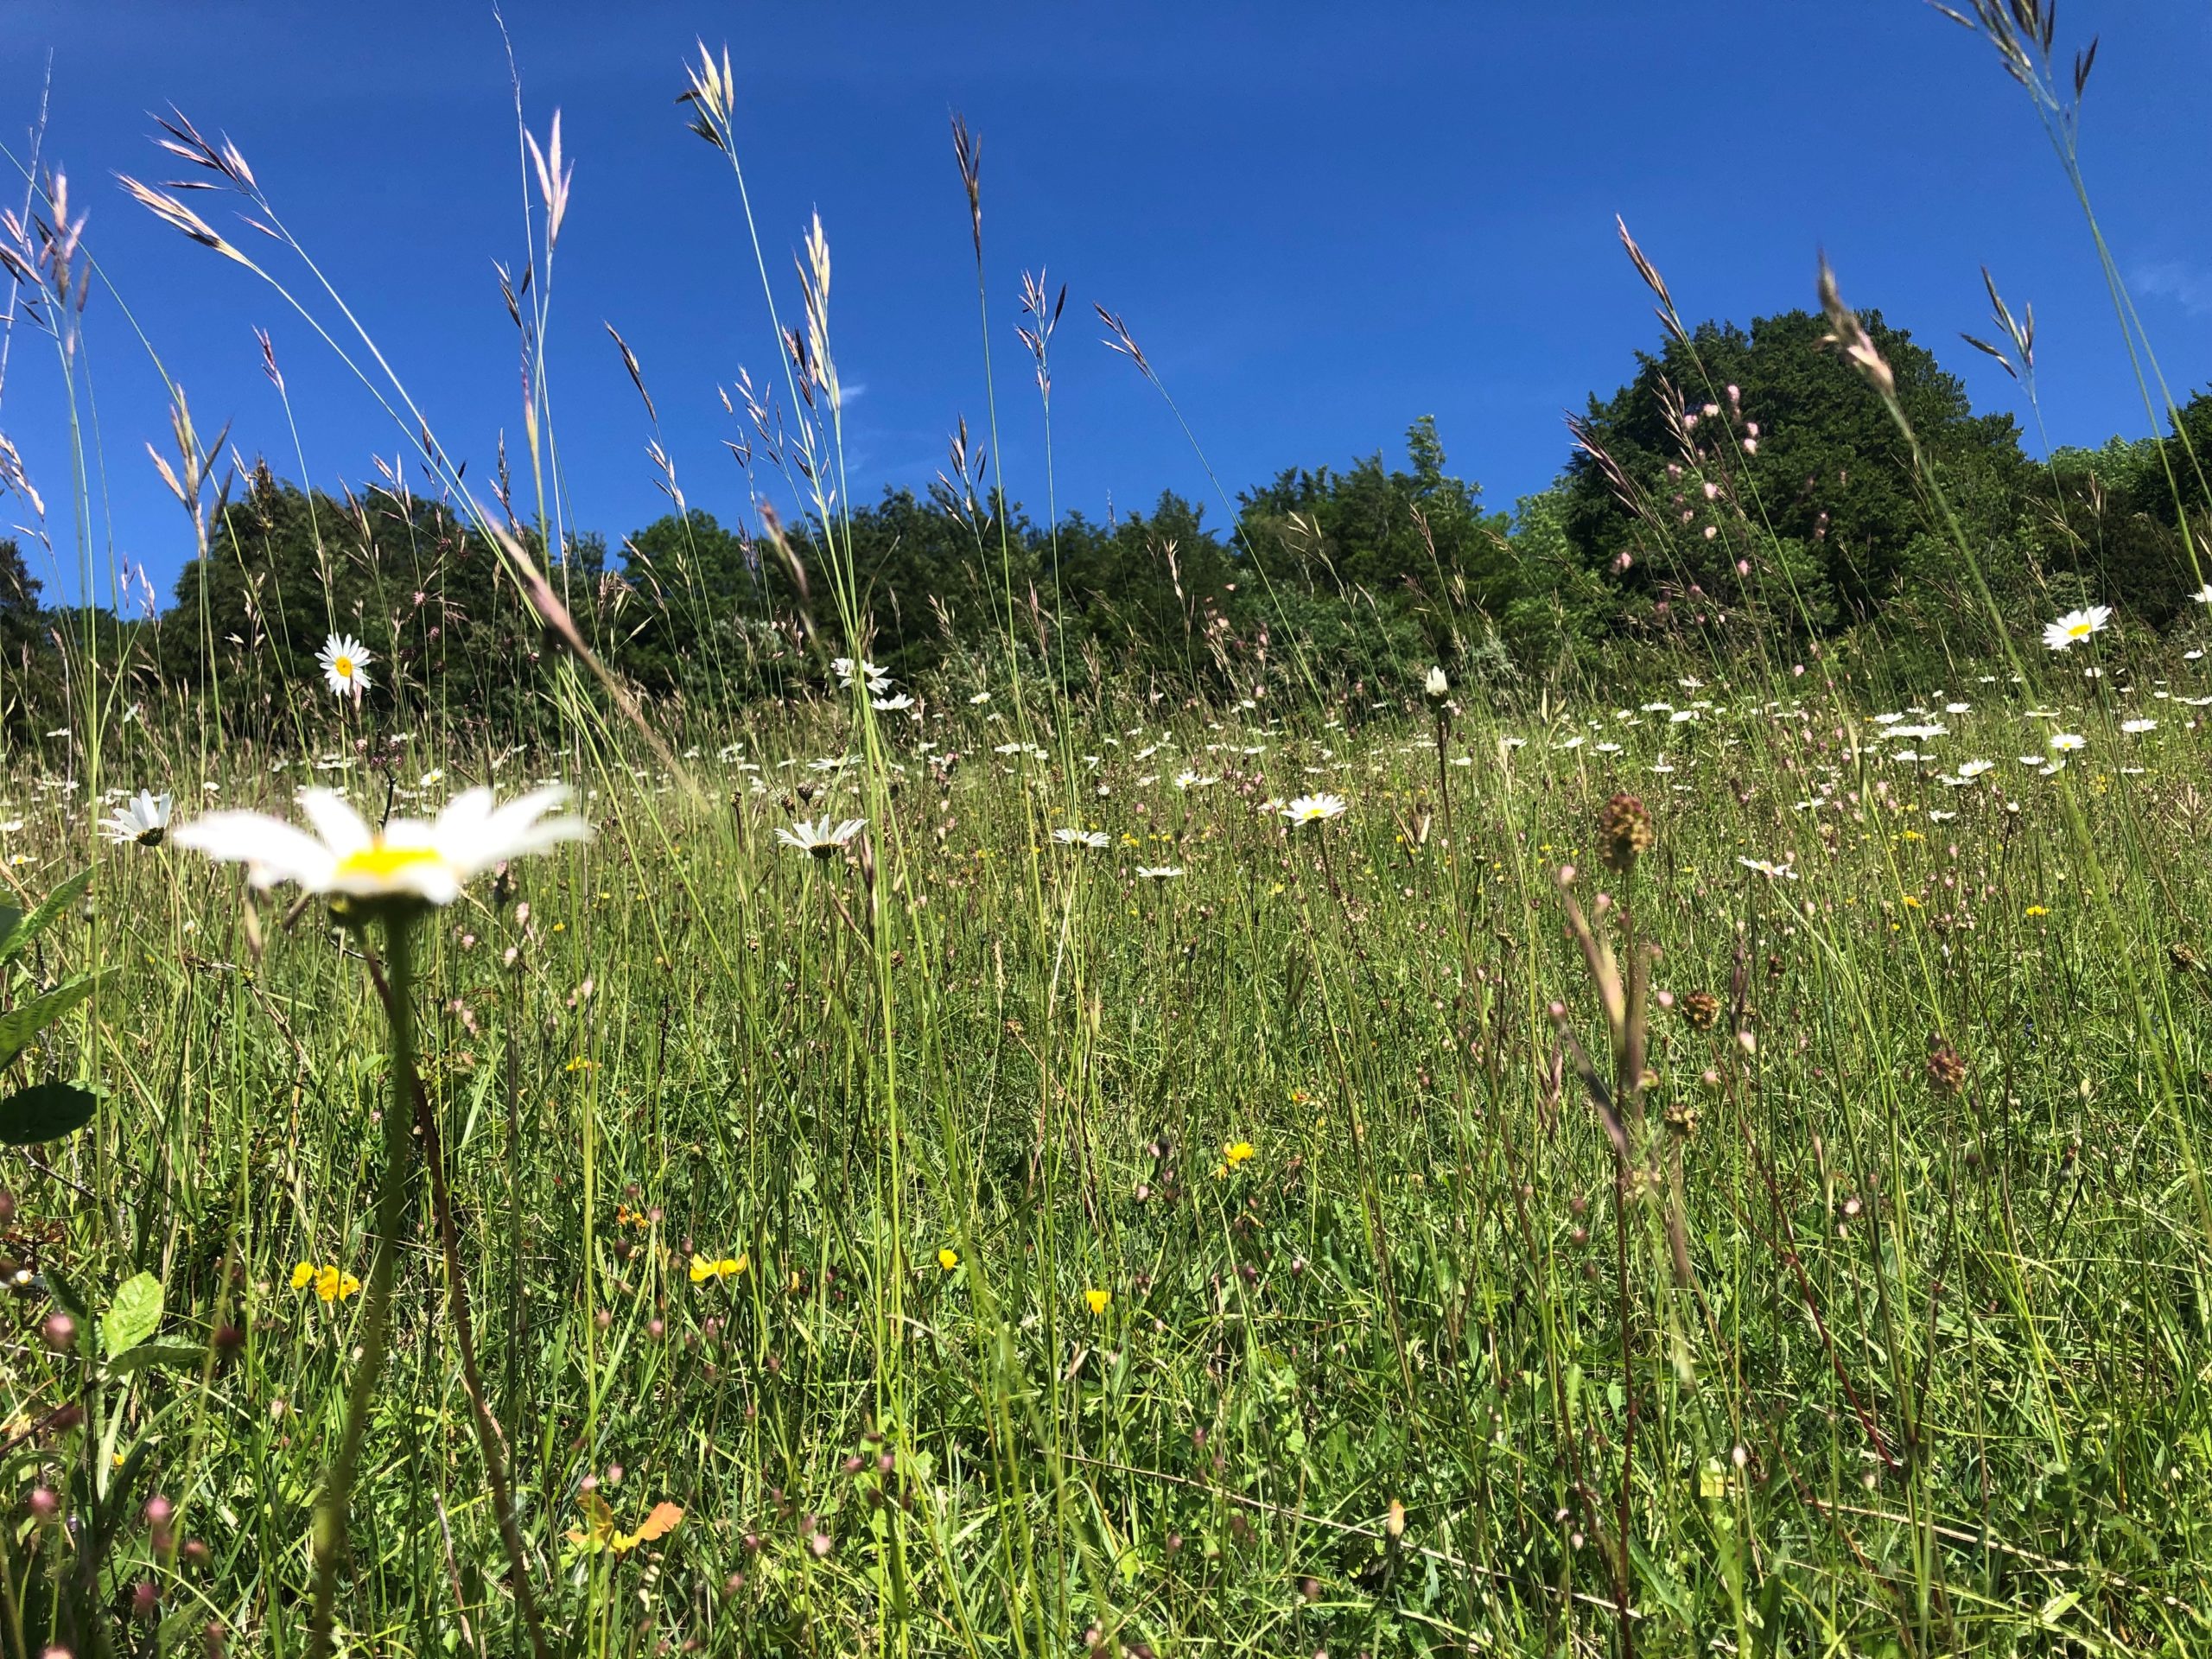 Grassland with flowers and blue sky above